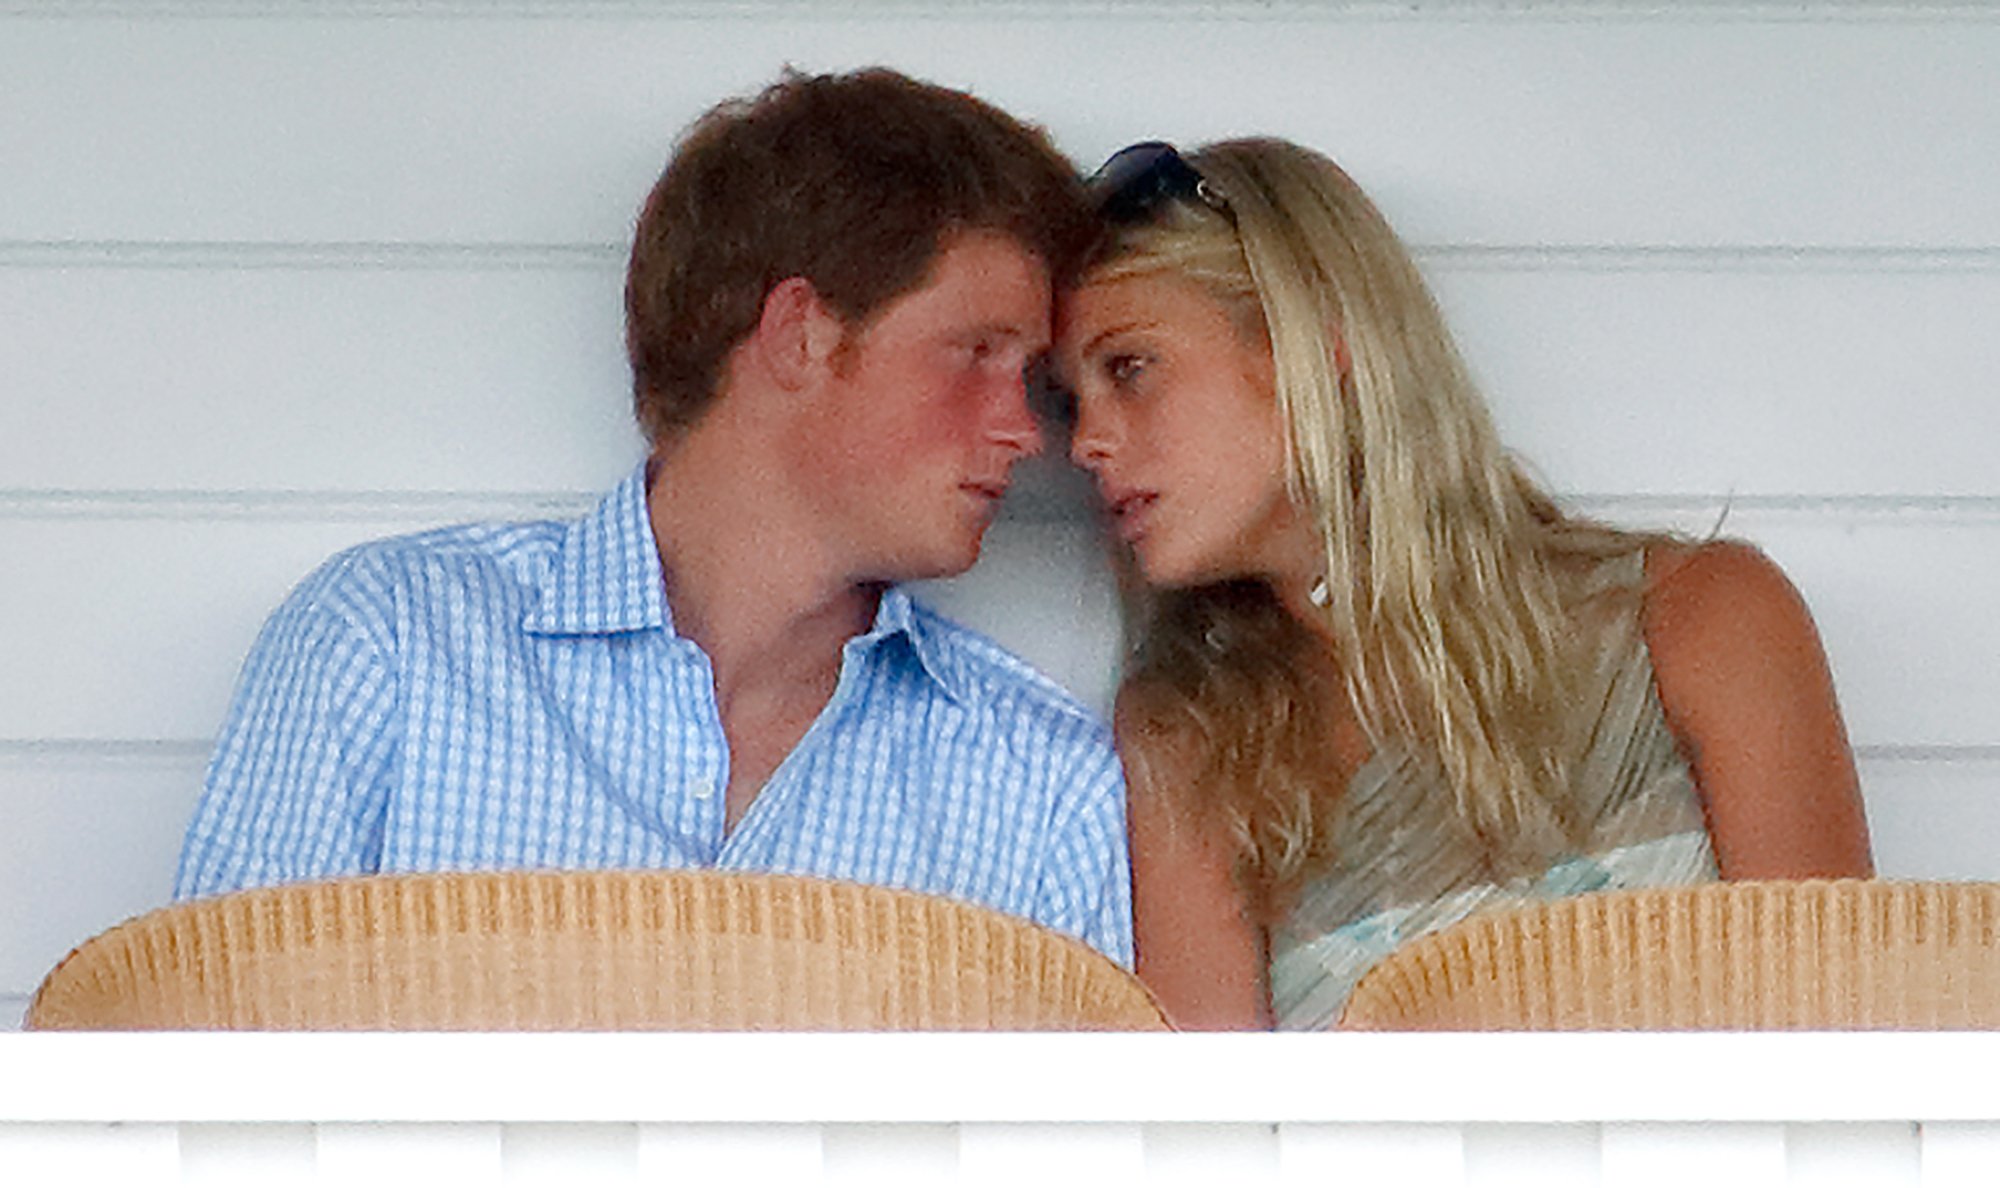 Prince Harry and Chelsy Davy in the Royal Box at the Cartier International Polo Match on July 30, 2006 | Source: Getty Images